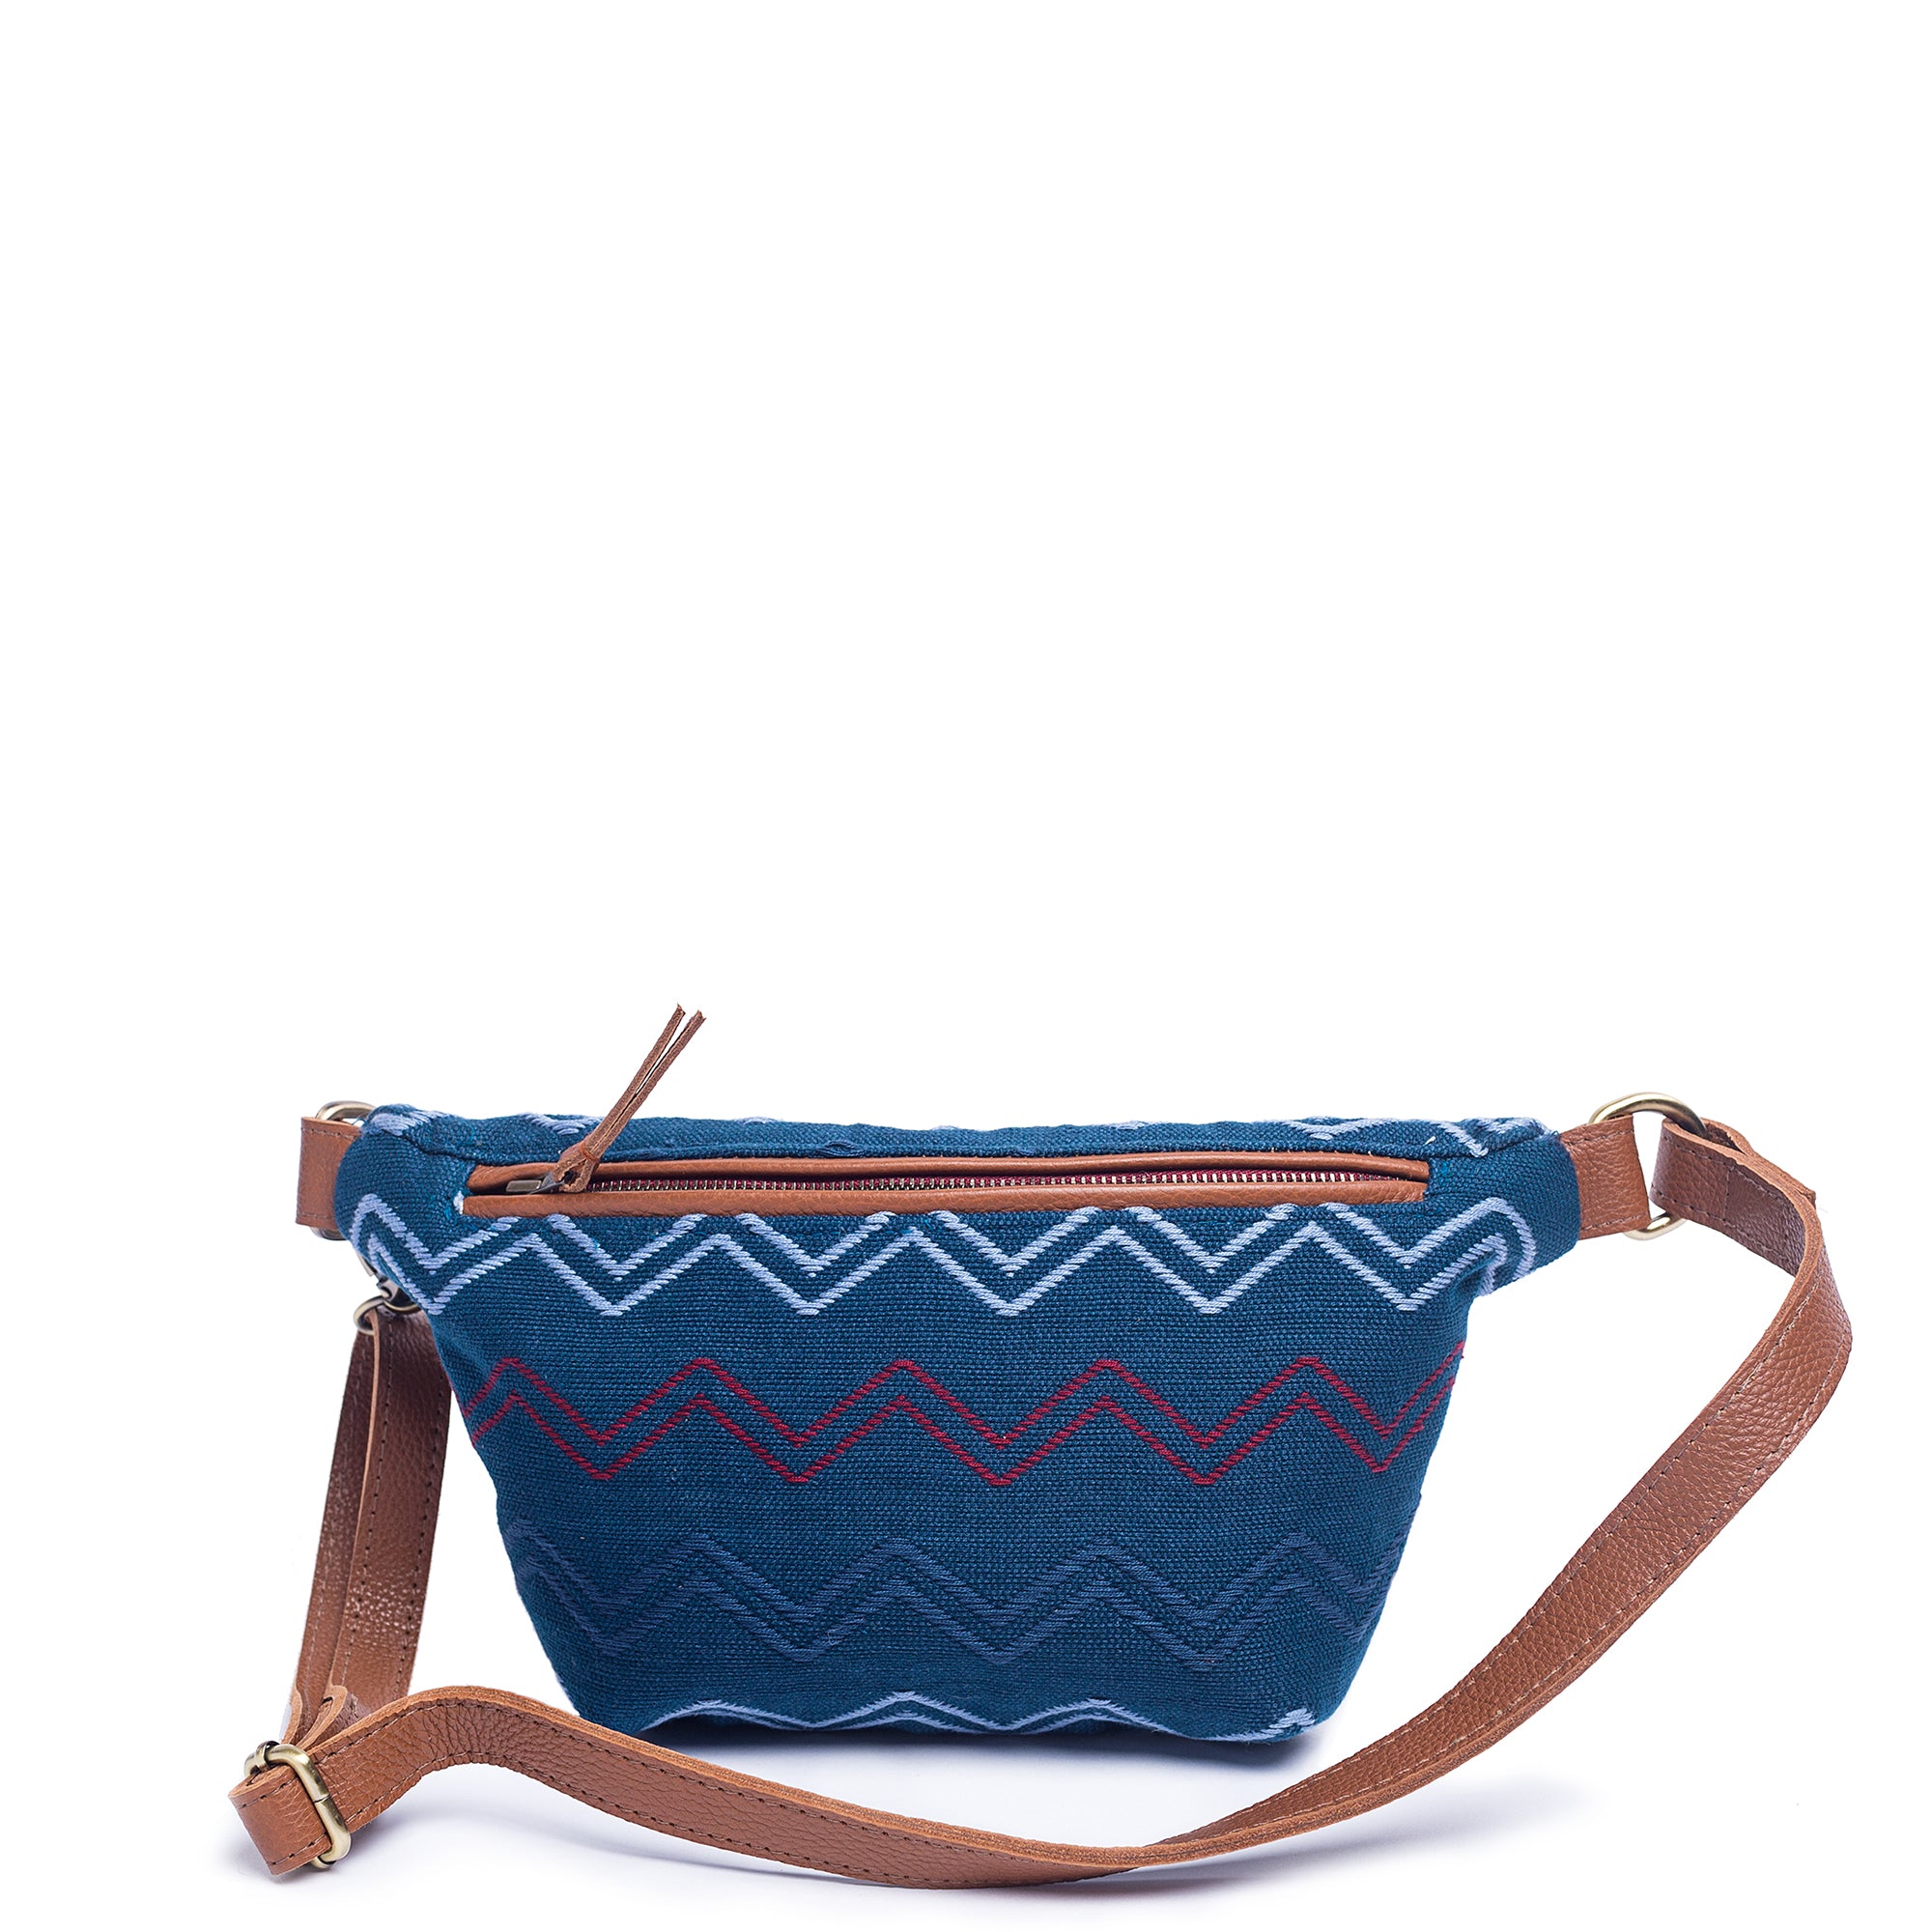 Front of the hand woven artisan Cruza Lake Ripple Sling Belt Bag. The fabric has a horizontal zigzag in light blue, dark blue, and red over a dark blue fabric. It has a leather adjustable strap, leather hem for the zipper, and leather zipper pull.